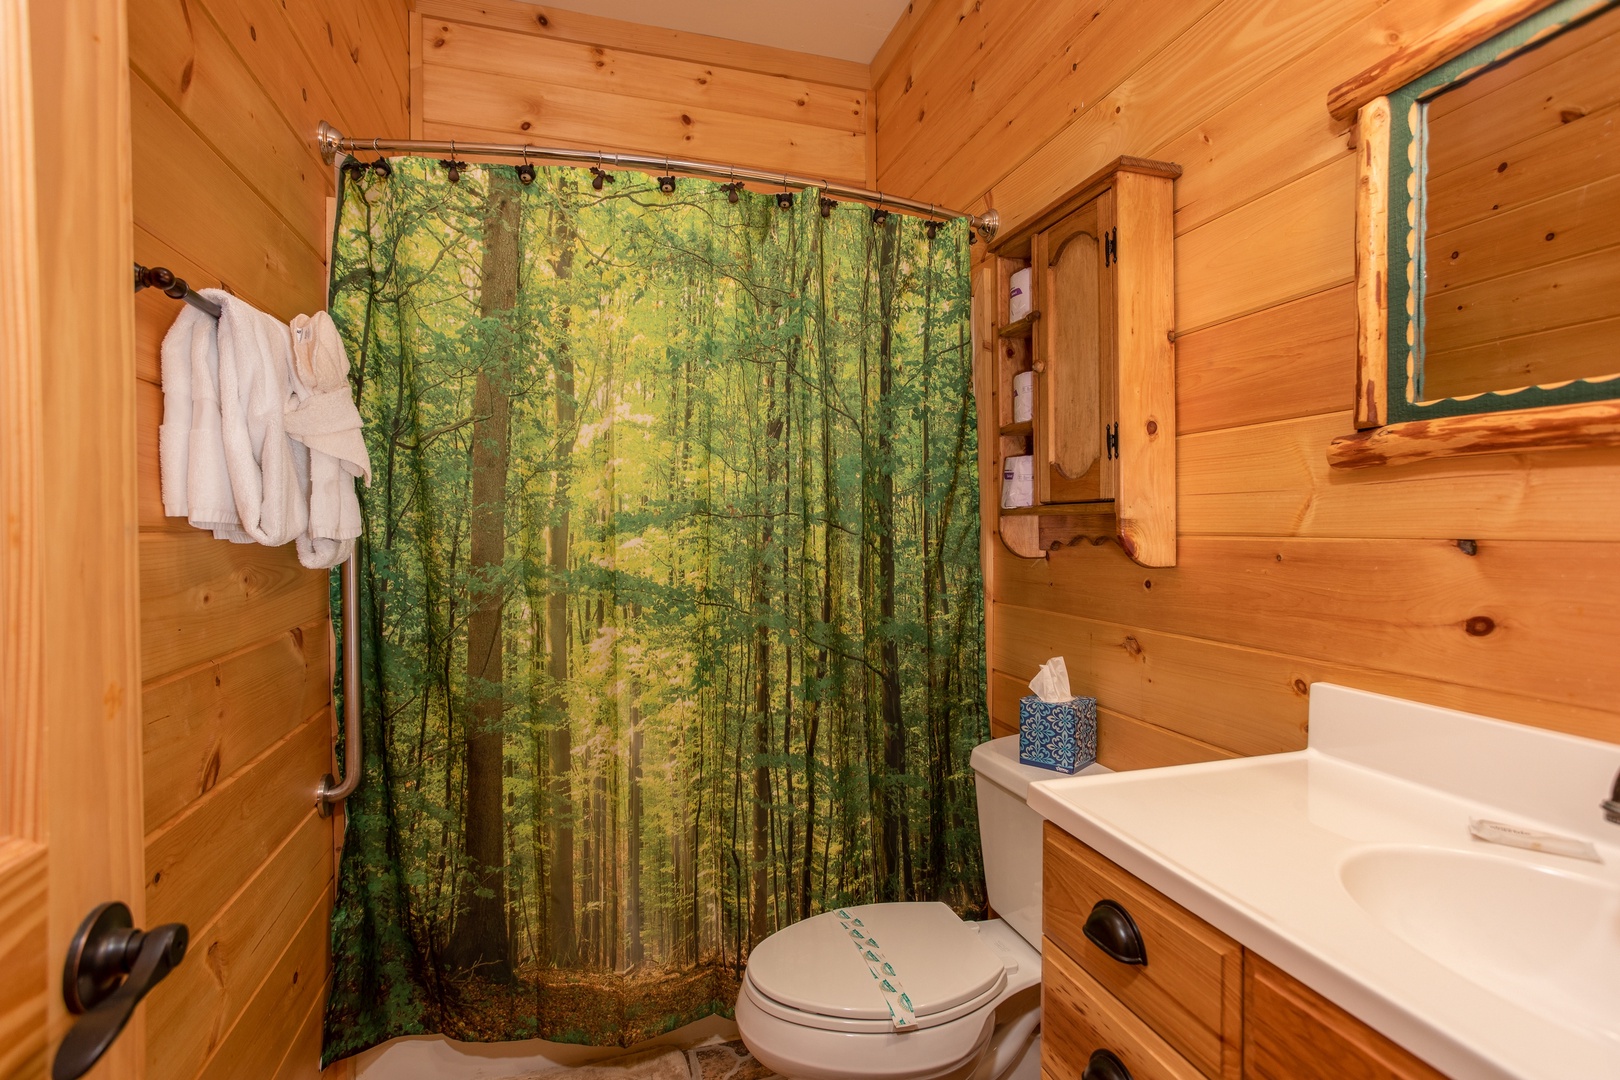 Bathroom with a tub and shower at Great View Lodge, a 5-bedroom cabin rental located in Pigeon Forge